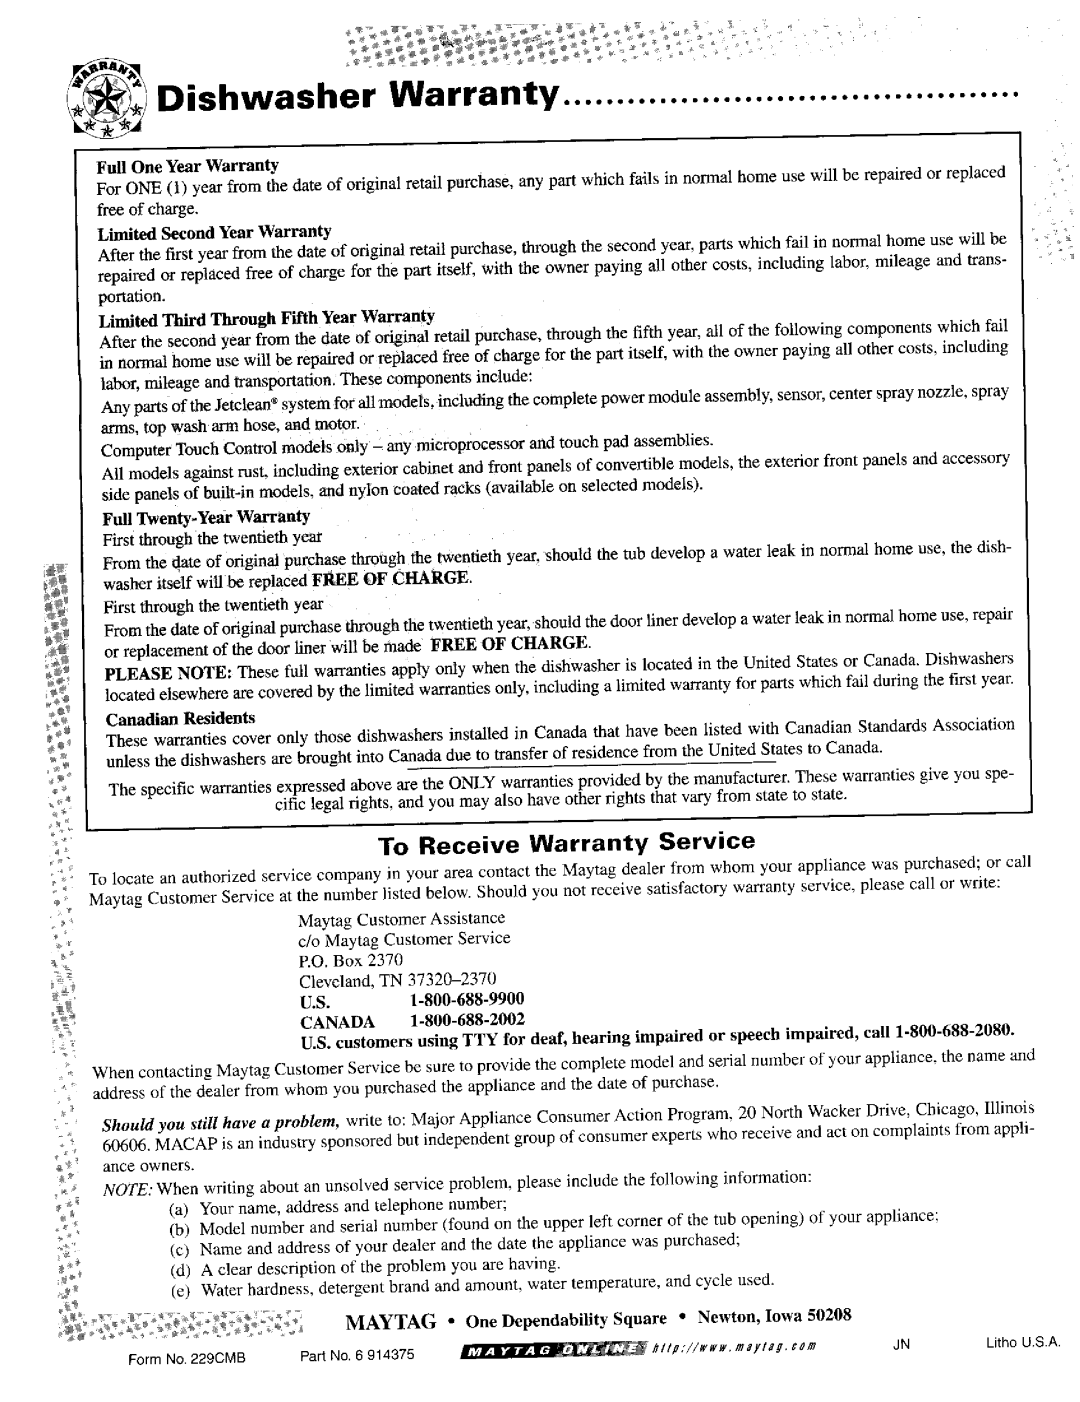 Maytag 9922 Dishwasher Warranty, To Receive Warranty Service, Full One Year Warranty, Limited Second, Canadian Residents 